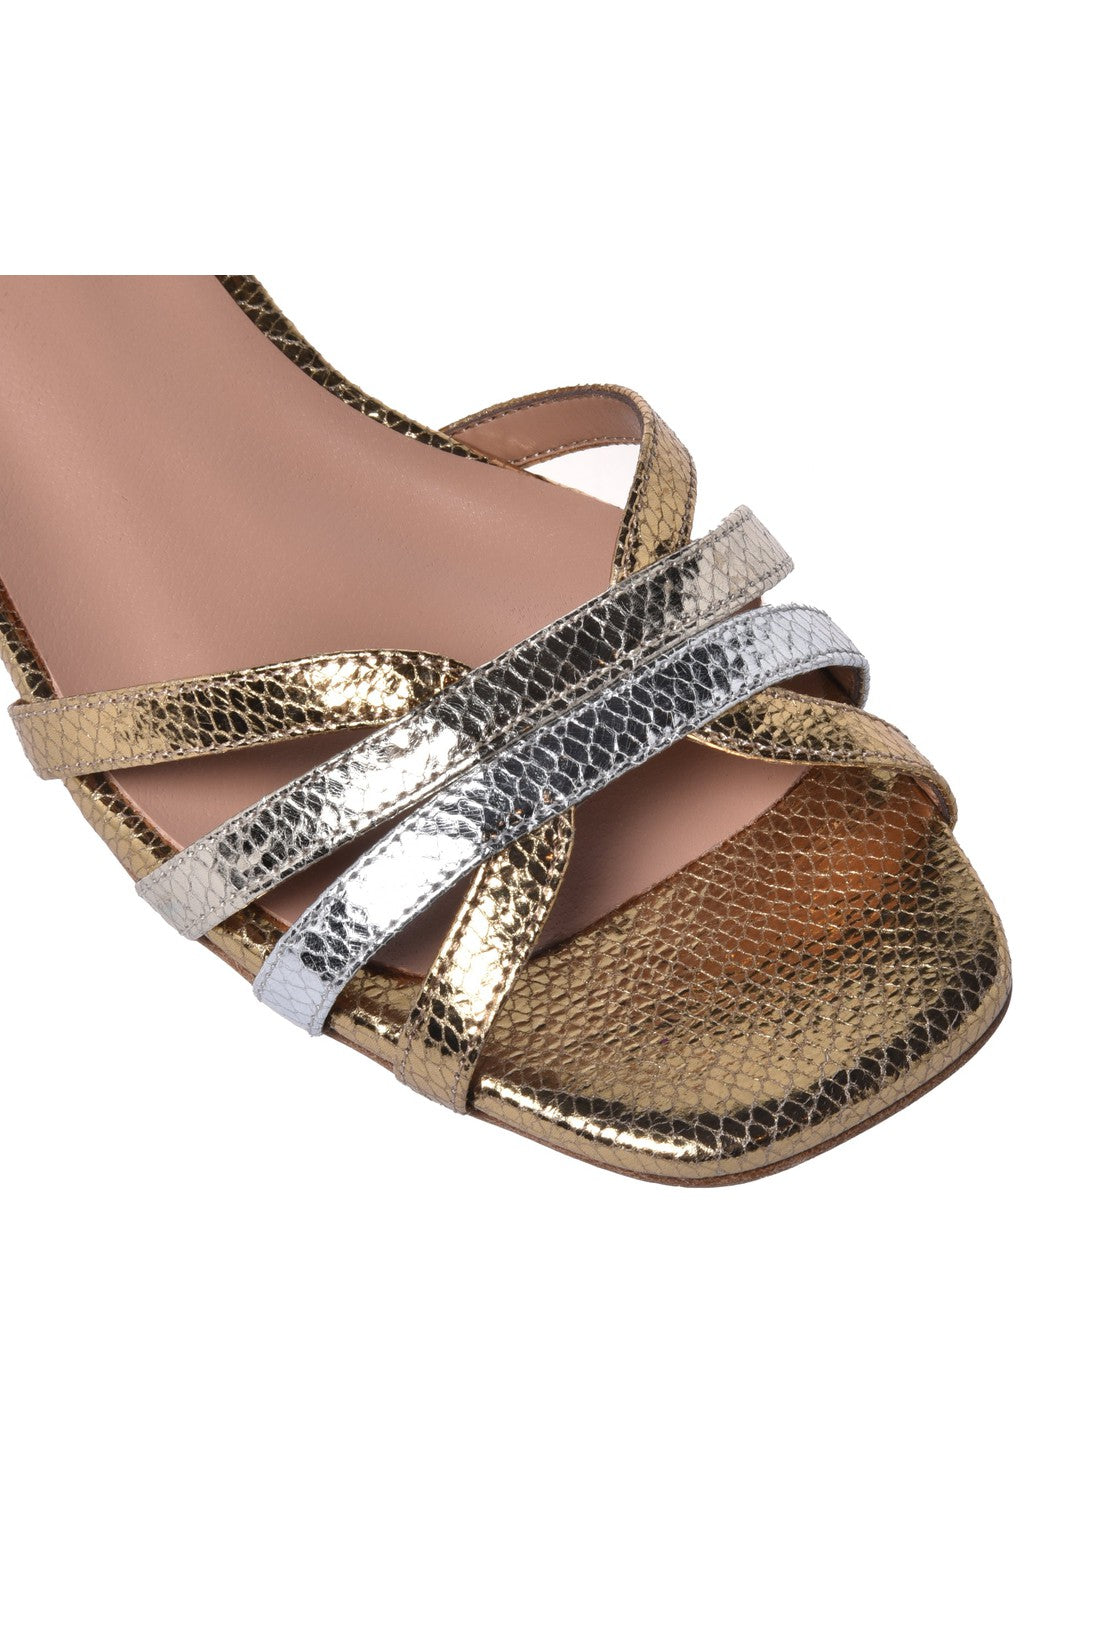 BALDININI-OUTLET-SALE-Sandal-in-silver-and-gold-laminated-nappa-leather-Sandalen-ARCHIVE-COLLECTION-4.jpg